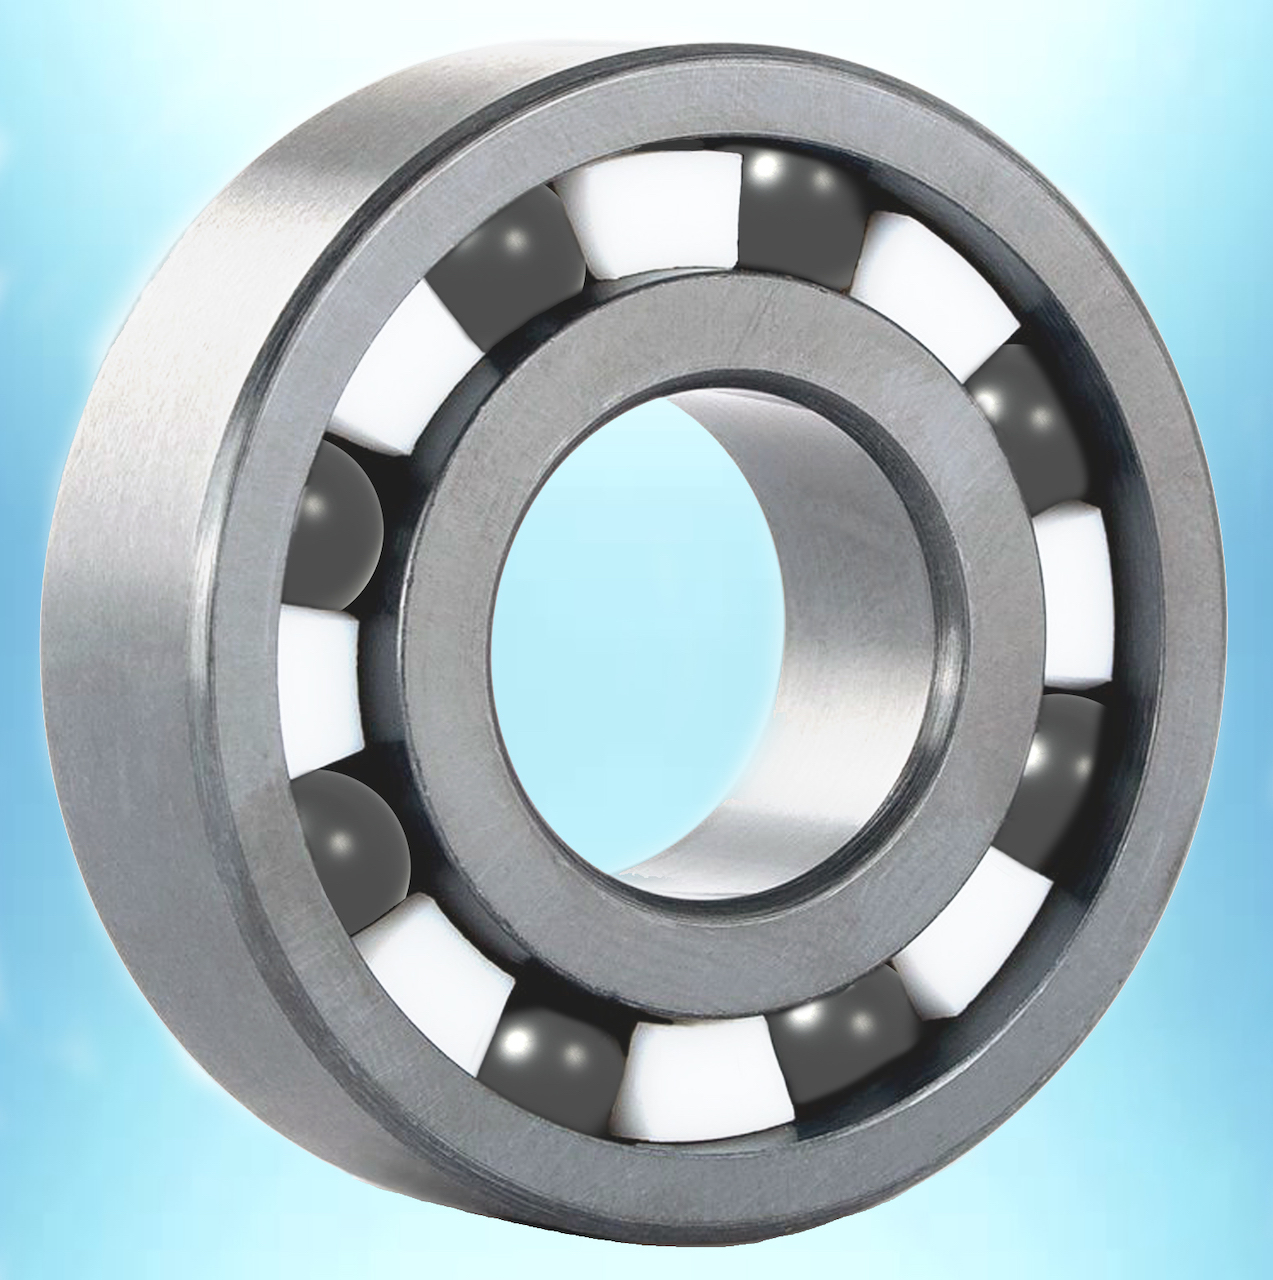 How to Choose the Right Bearing Material for the Job - Part 3